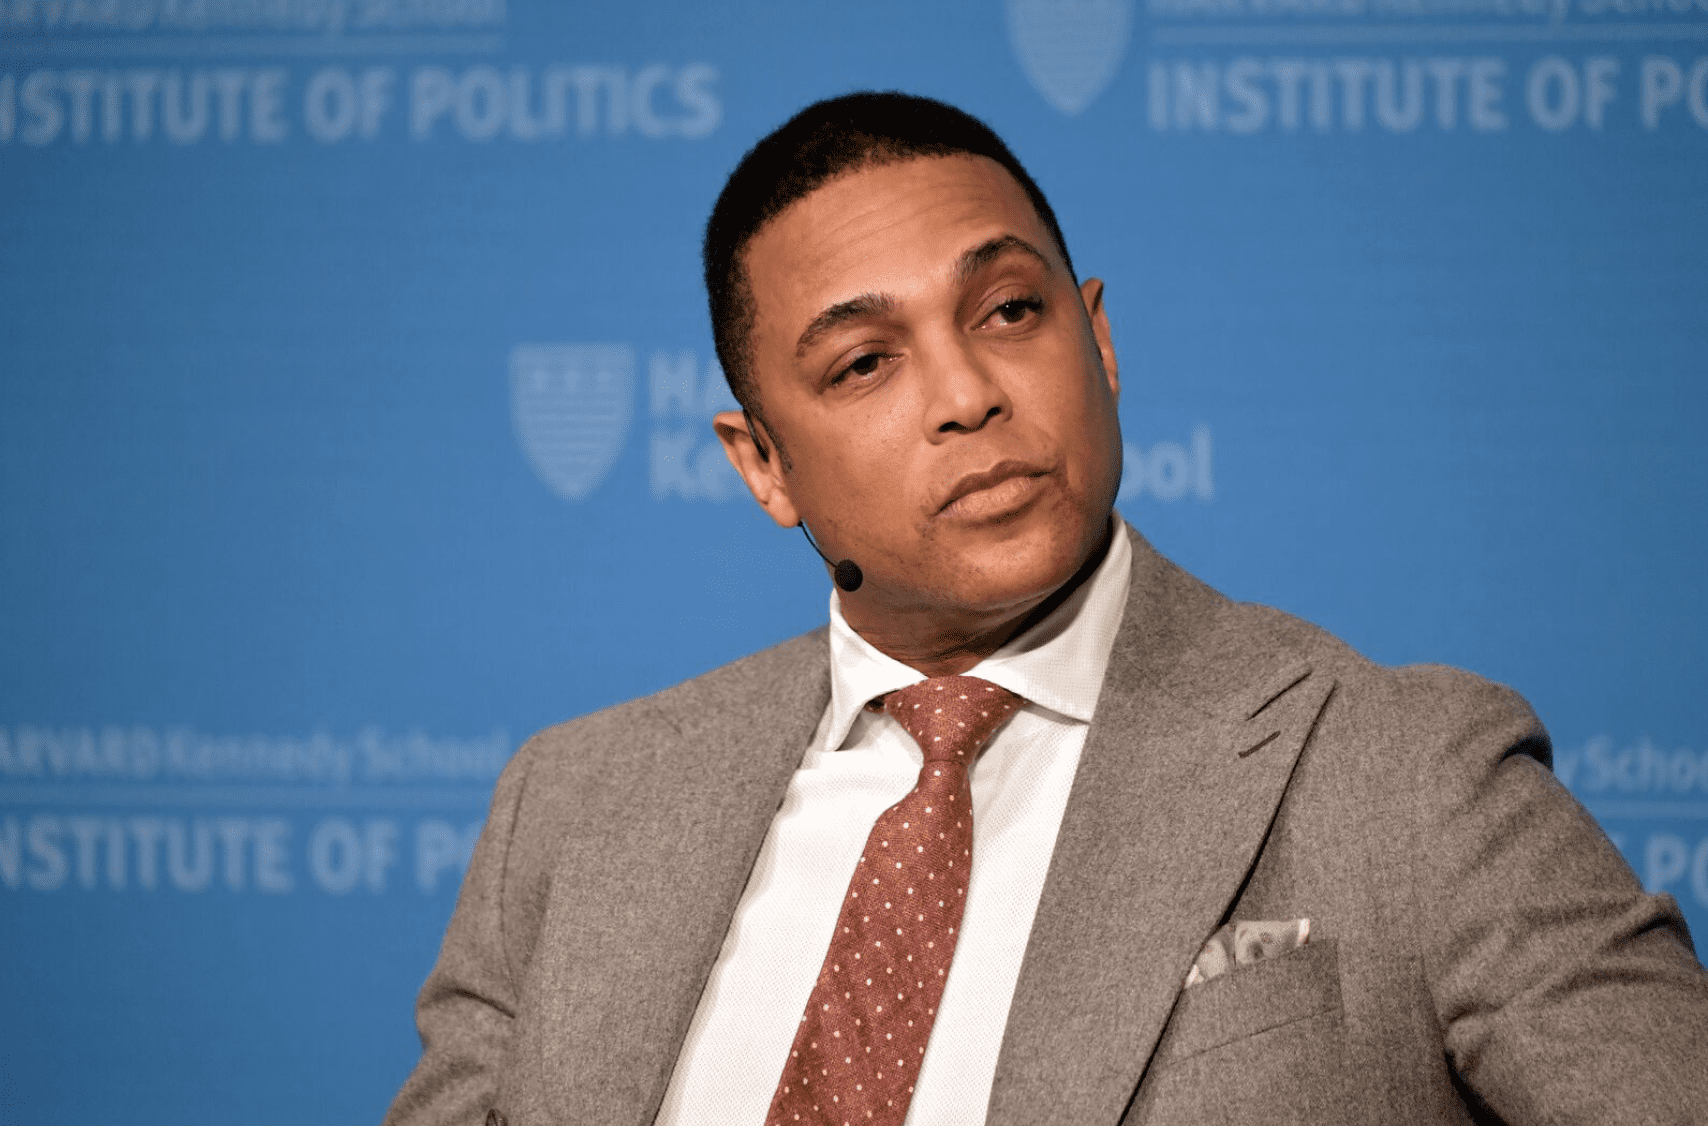 CNN's Don Lemon speaks at Harvard University Kennedy School of Government Institute of Politics on February 22, 2019. | Source: Getty Images